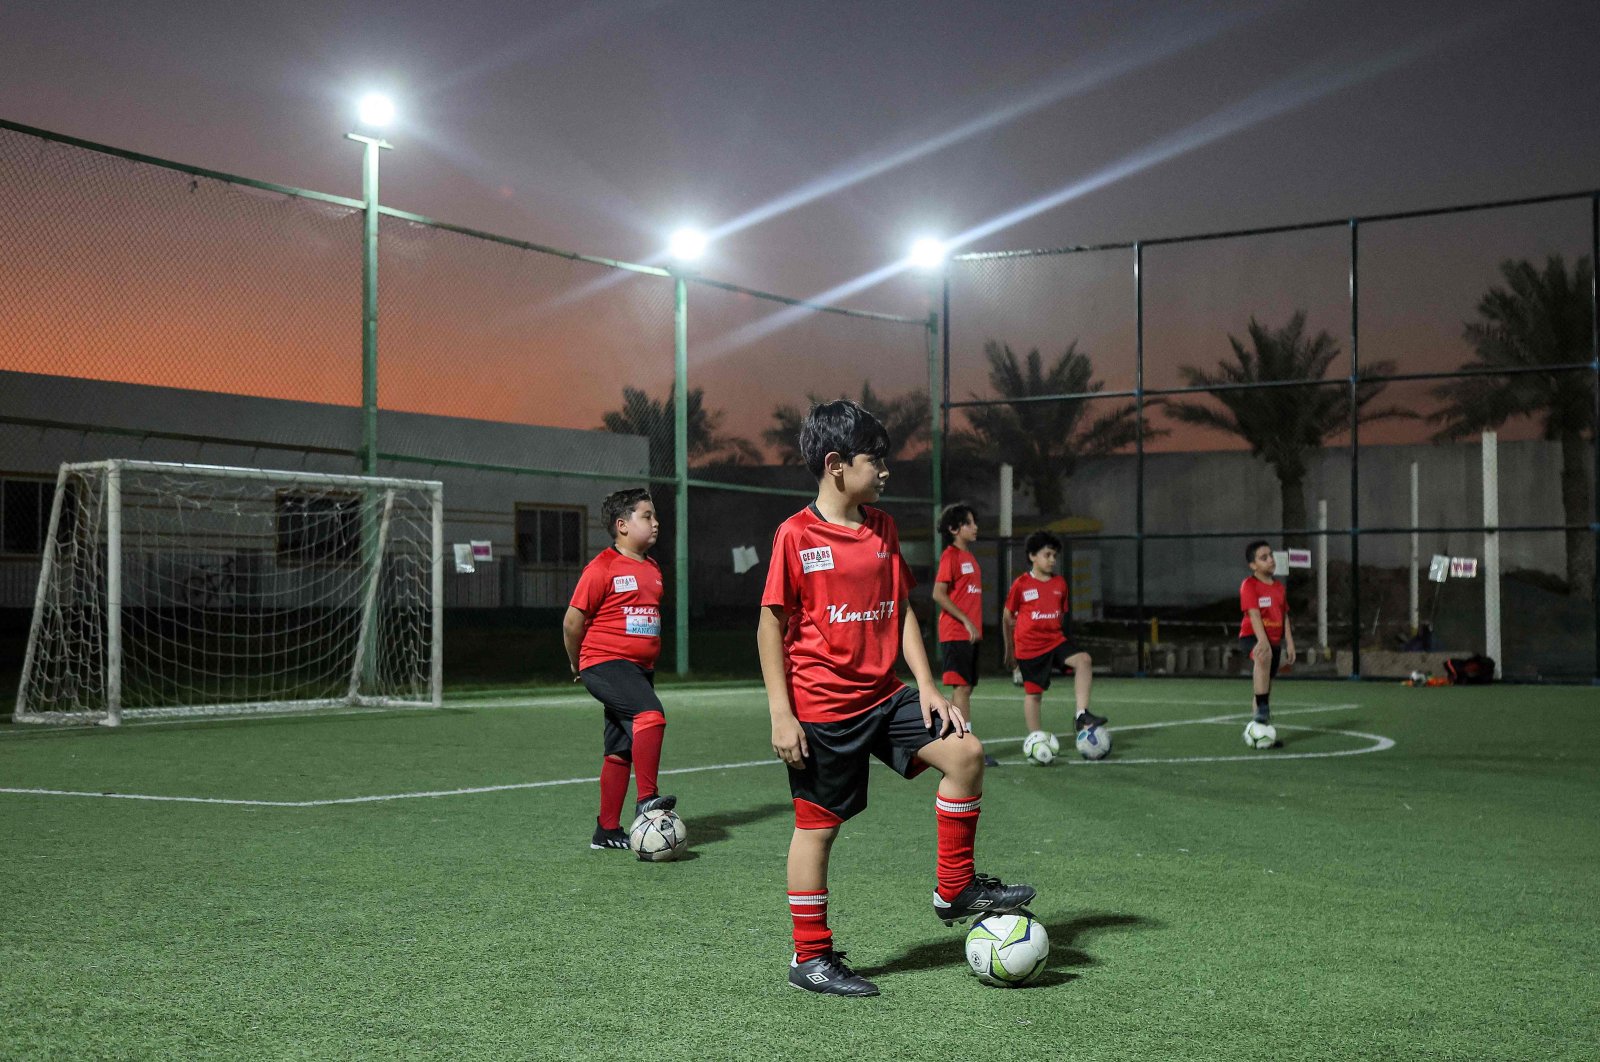 World Cup excitement inspires kids in Qatar to confront obesity